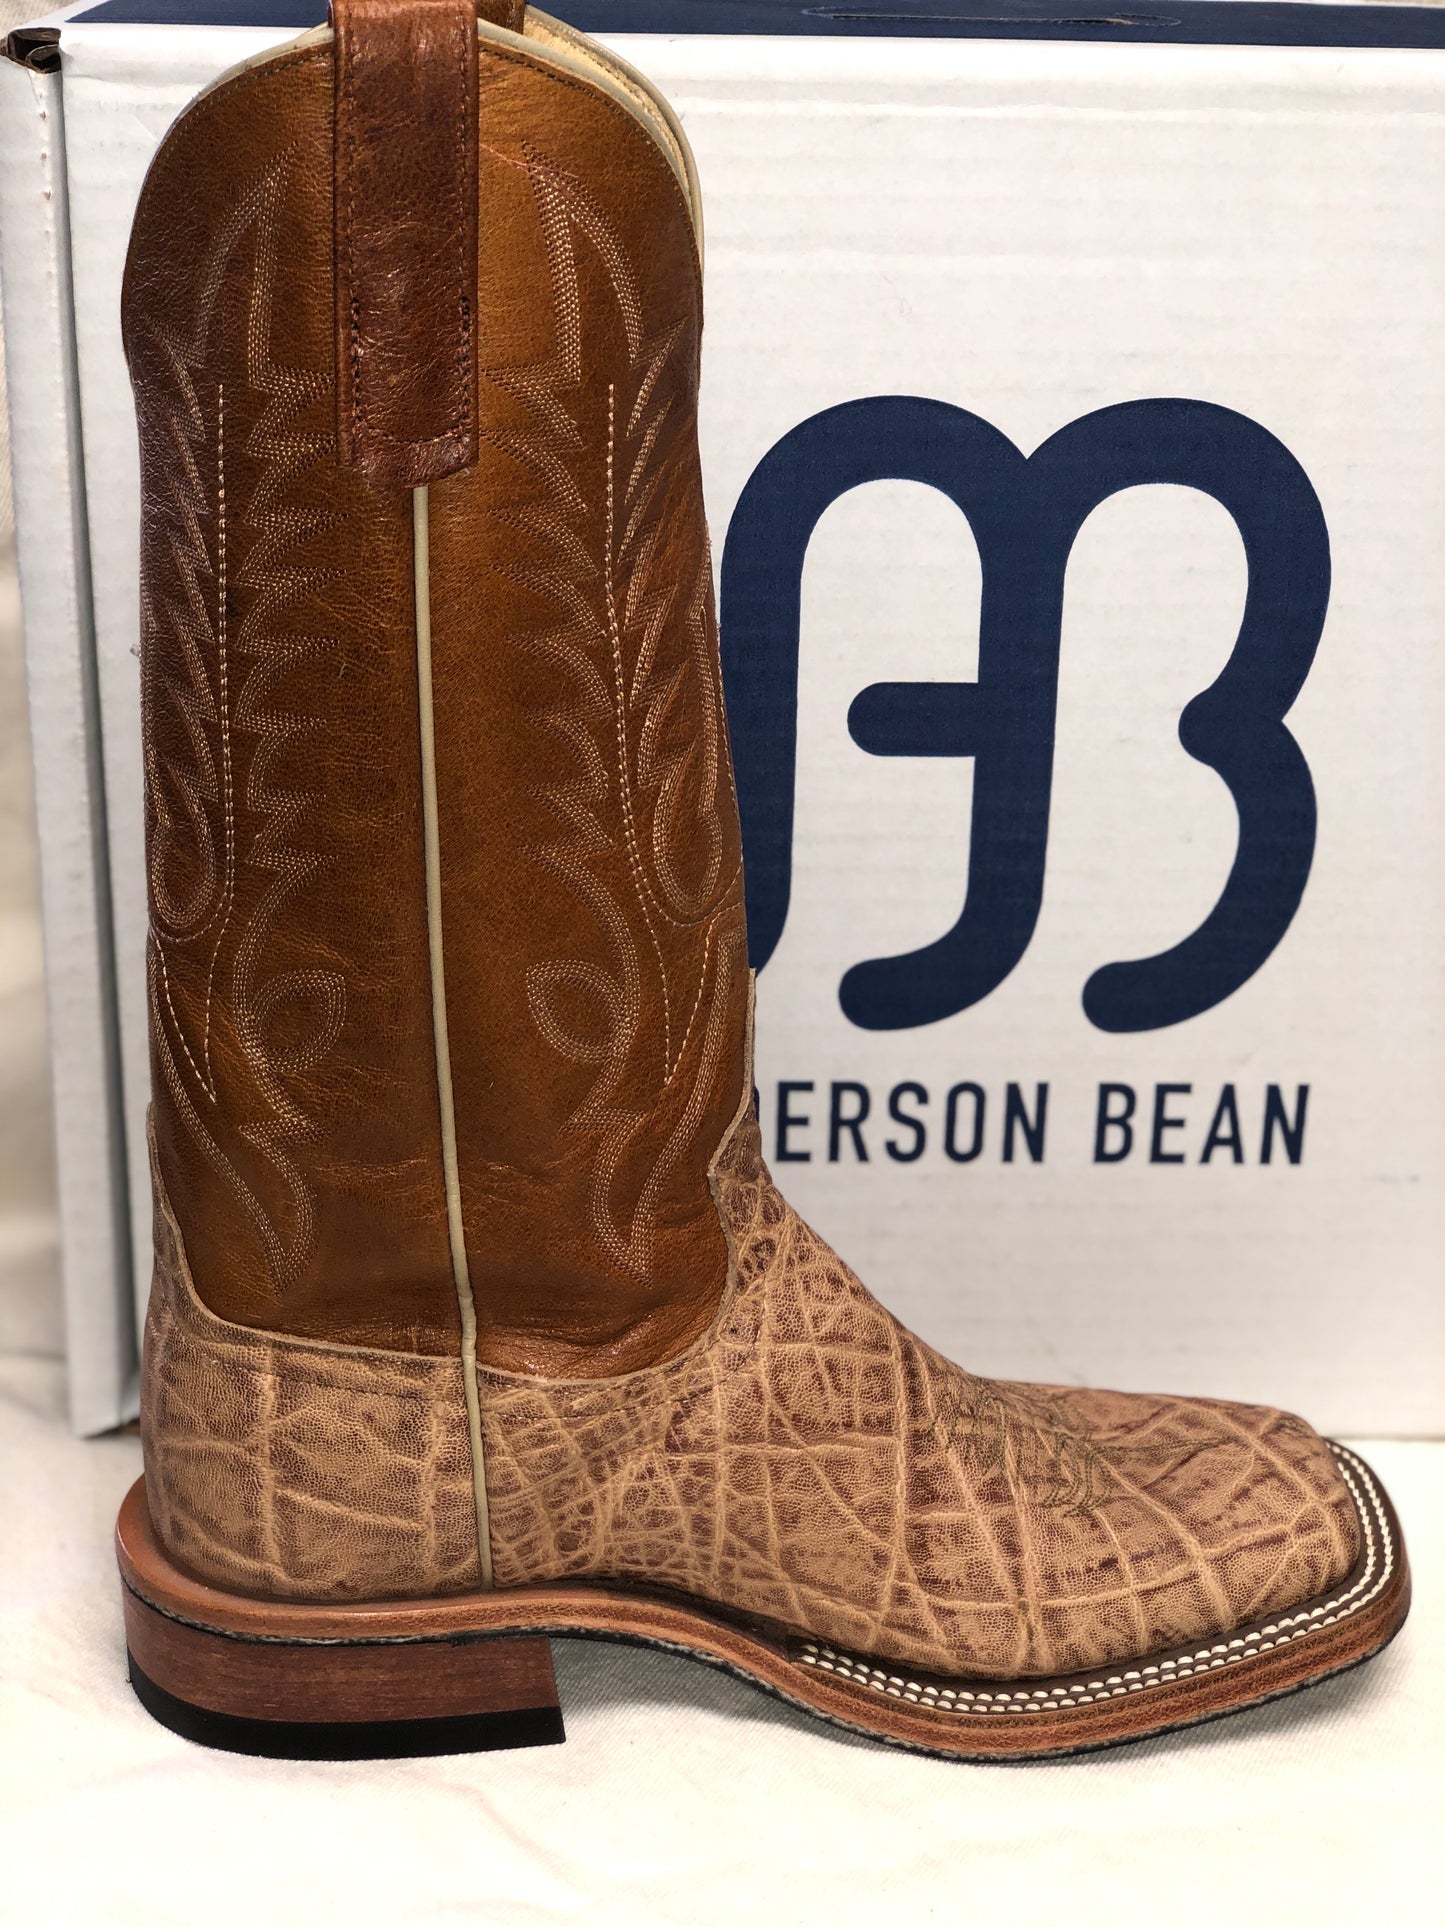 Anderson Bean Elephant Tan Tipped (3785m)